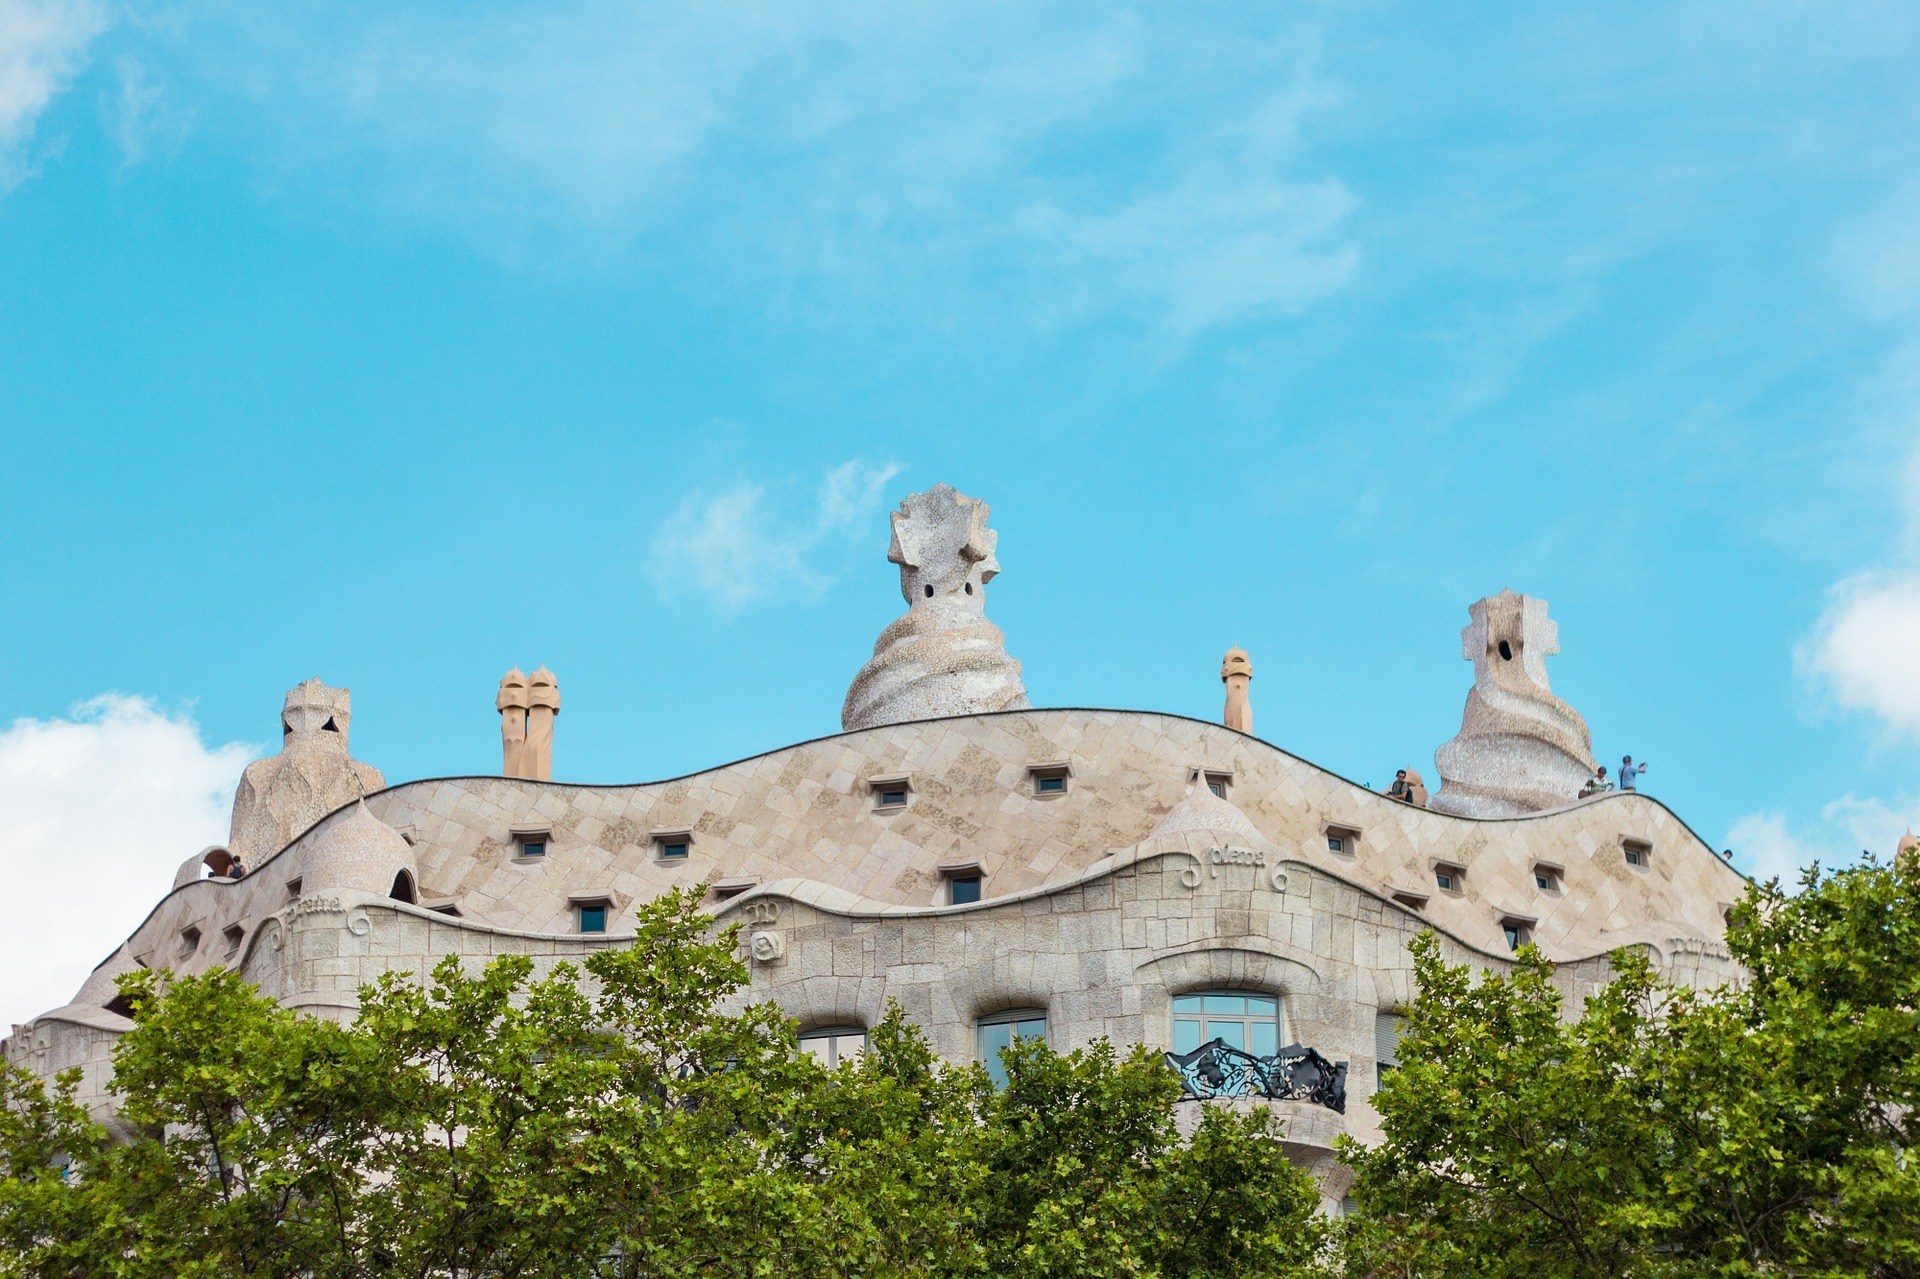 Visiting Barcelona: 5 Places Not to Miss - Gaudi